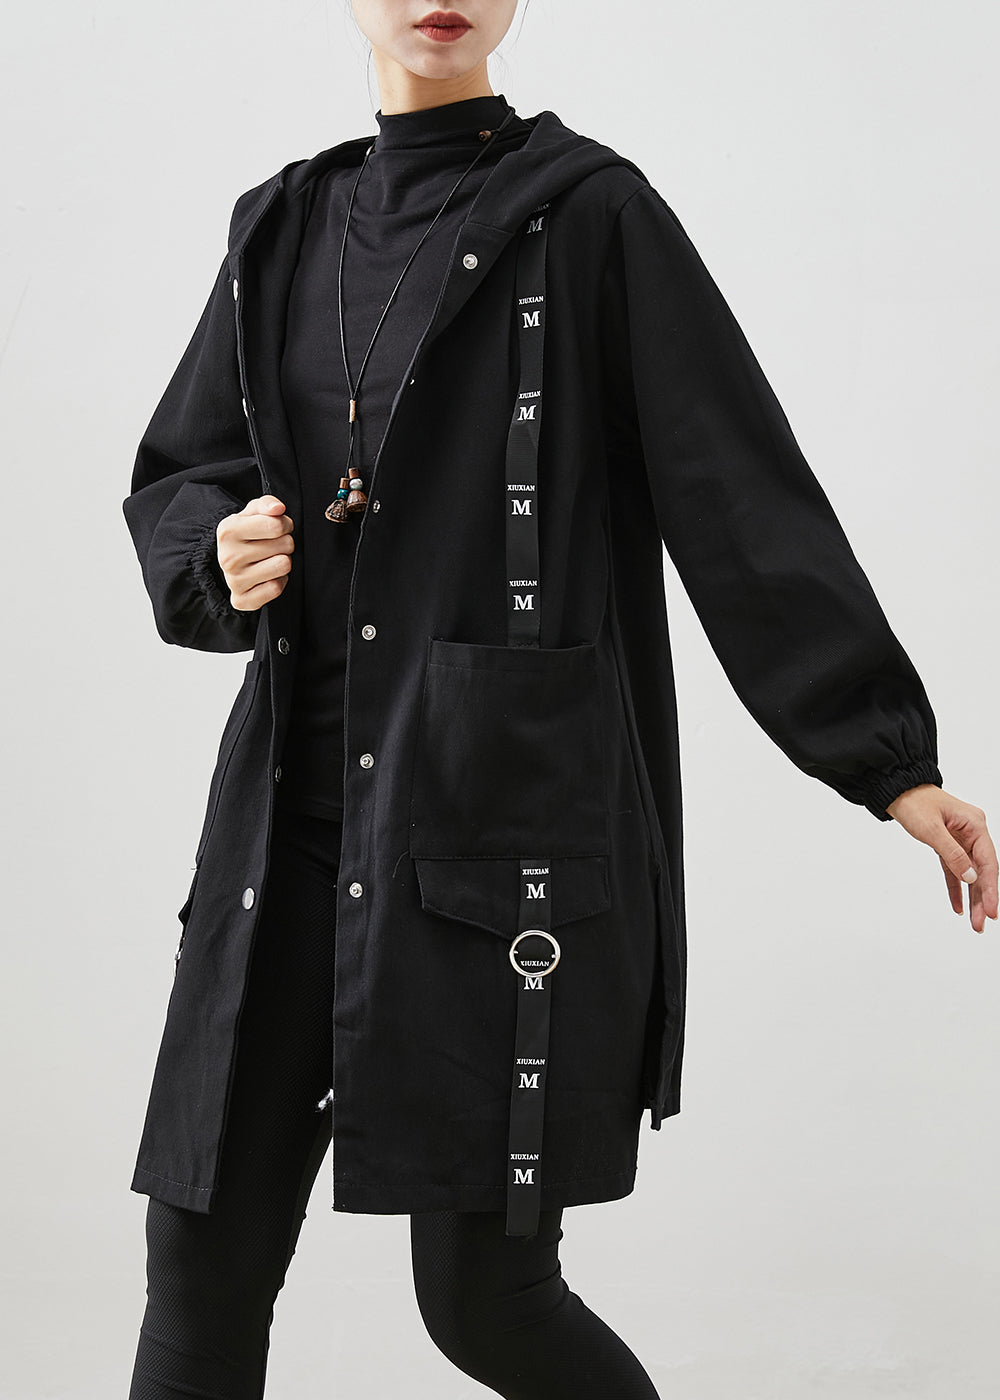 Black Patchwork Cotton Hoodie Trench Coat Oversized Fall